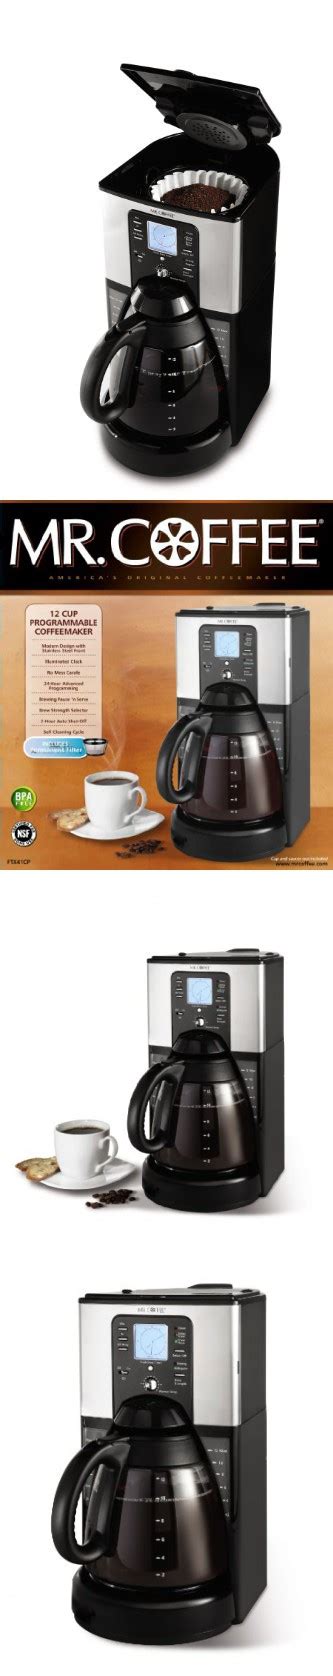 Mr Coffee Ftx41 12 Cup Programmable Coffeemaker Black And Chrome